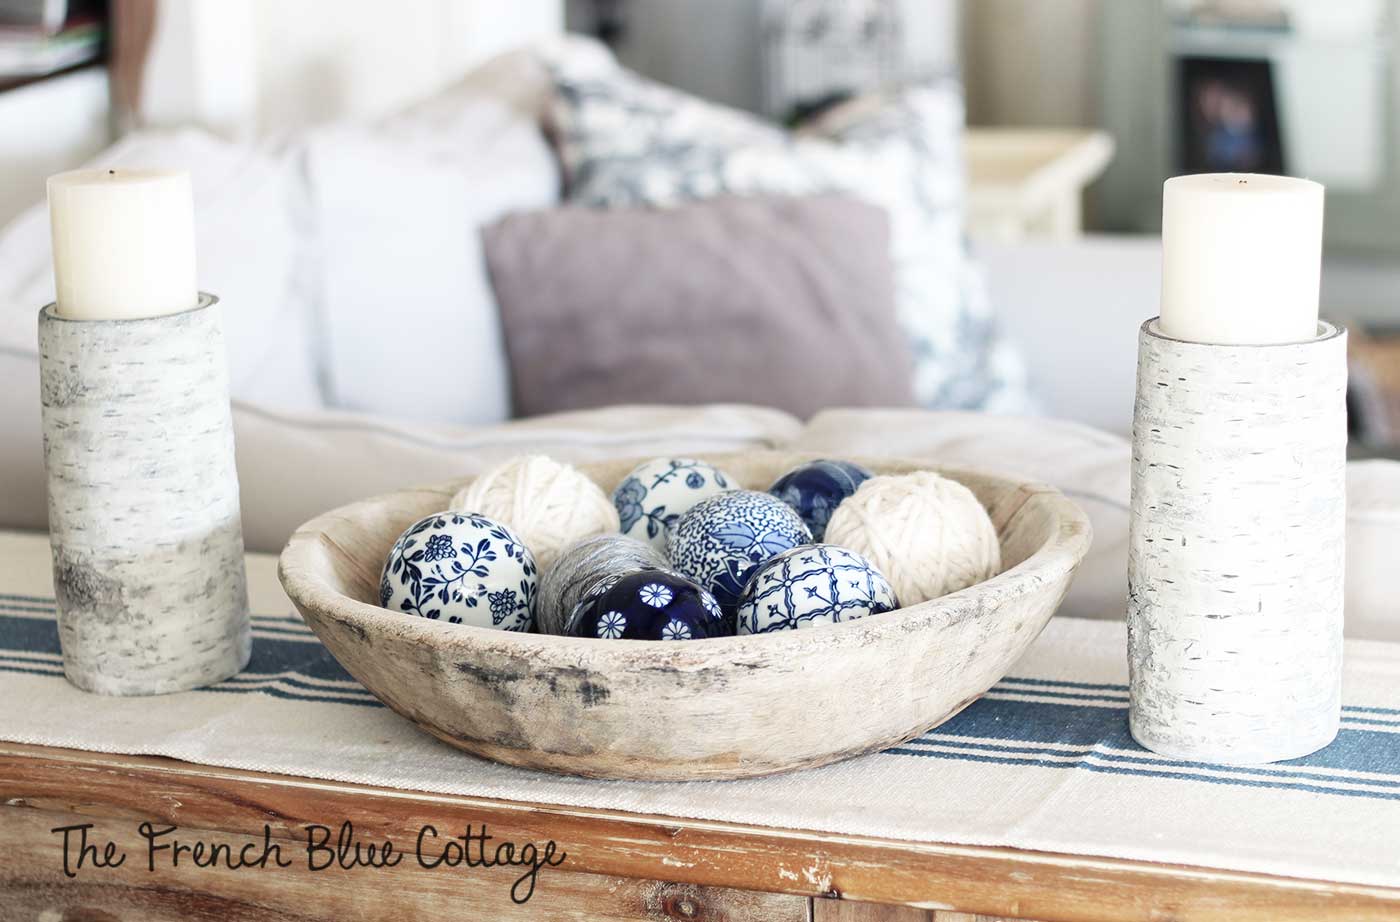 Textural winter vignette with yarn, birch, and blue ceramic.